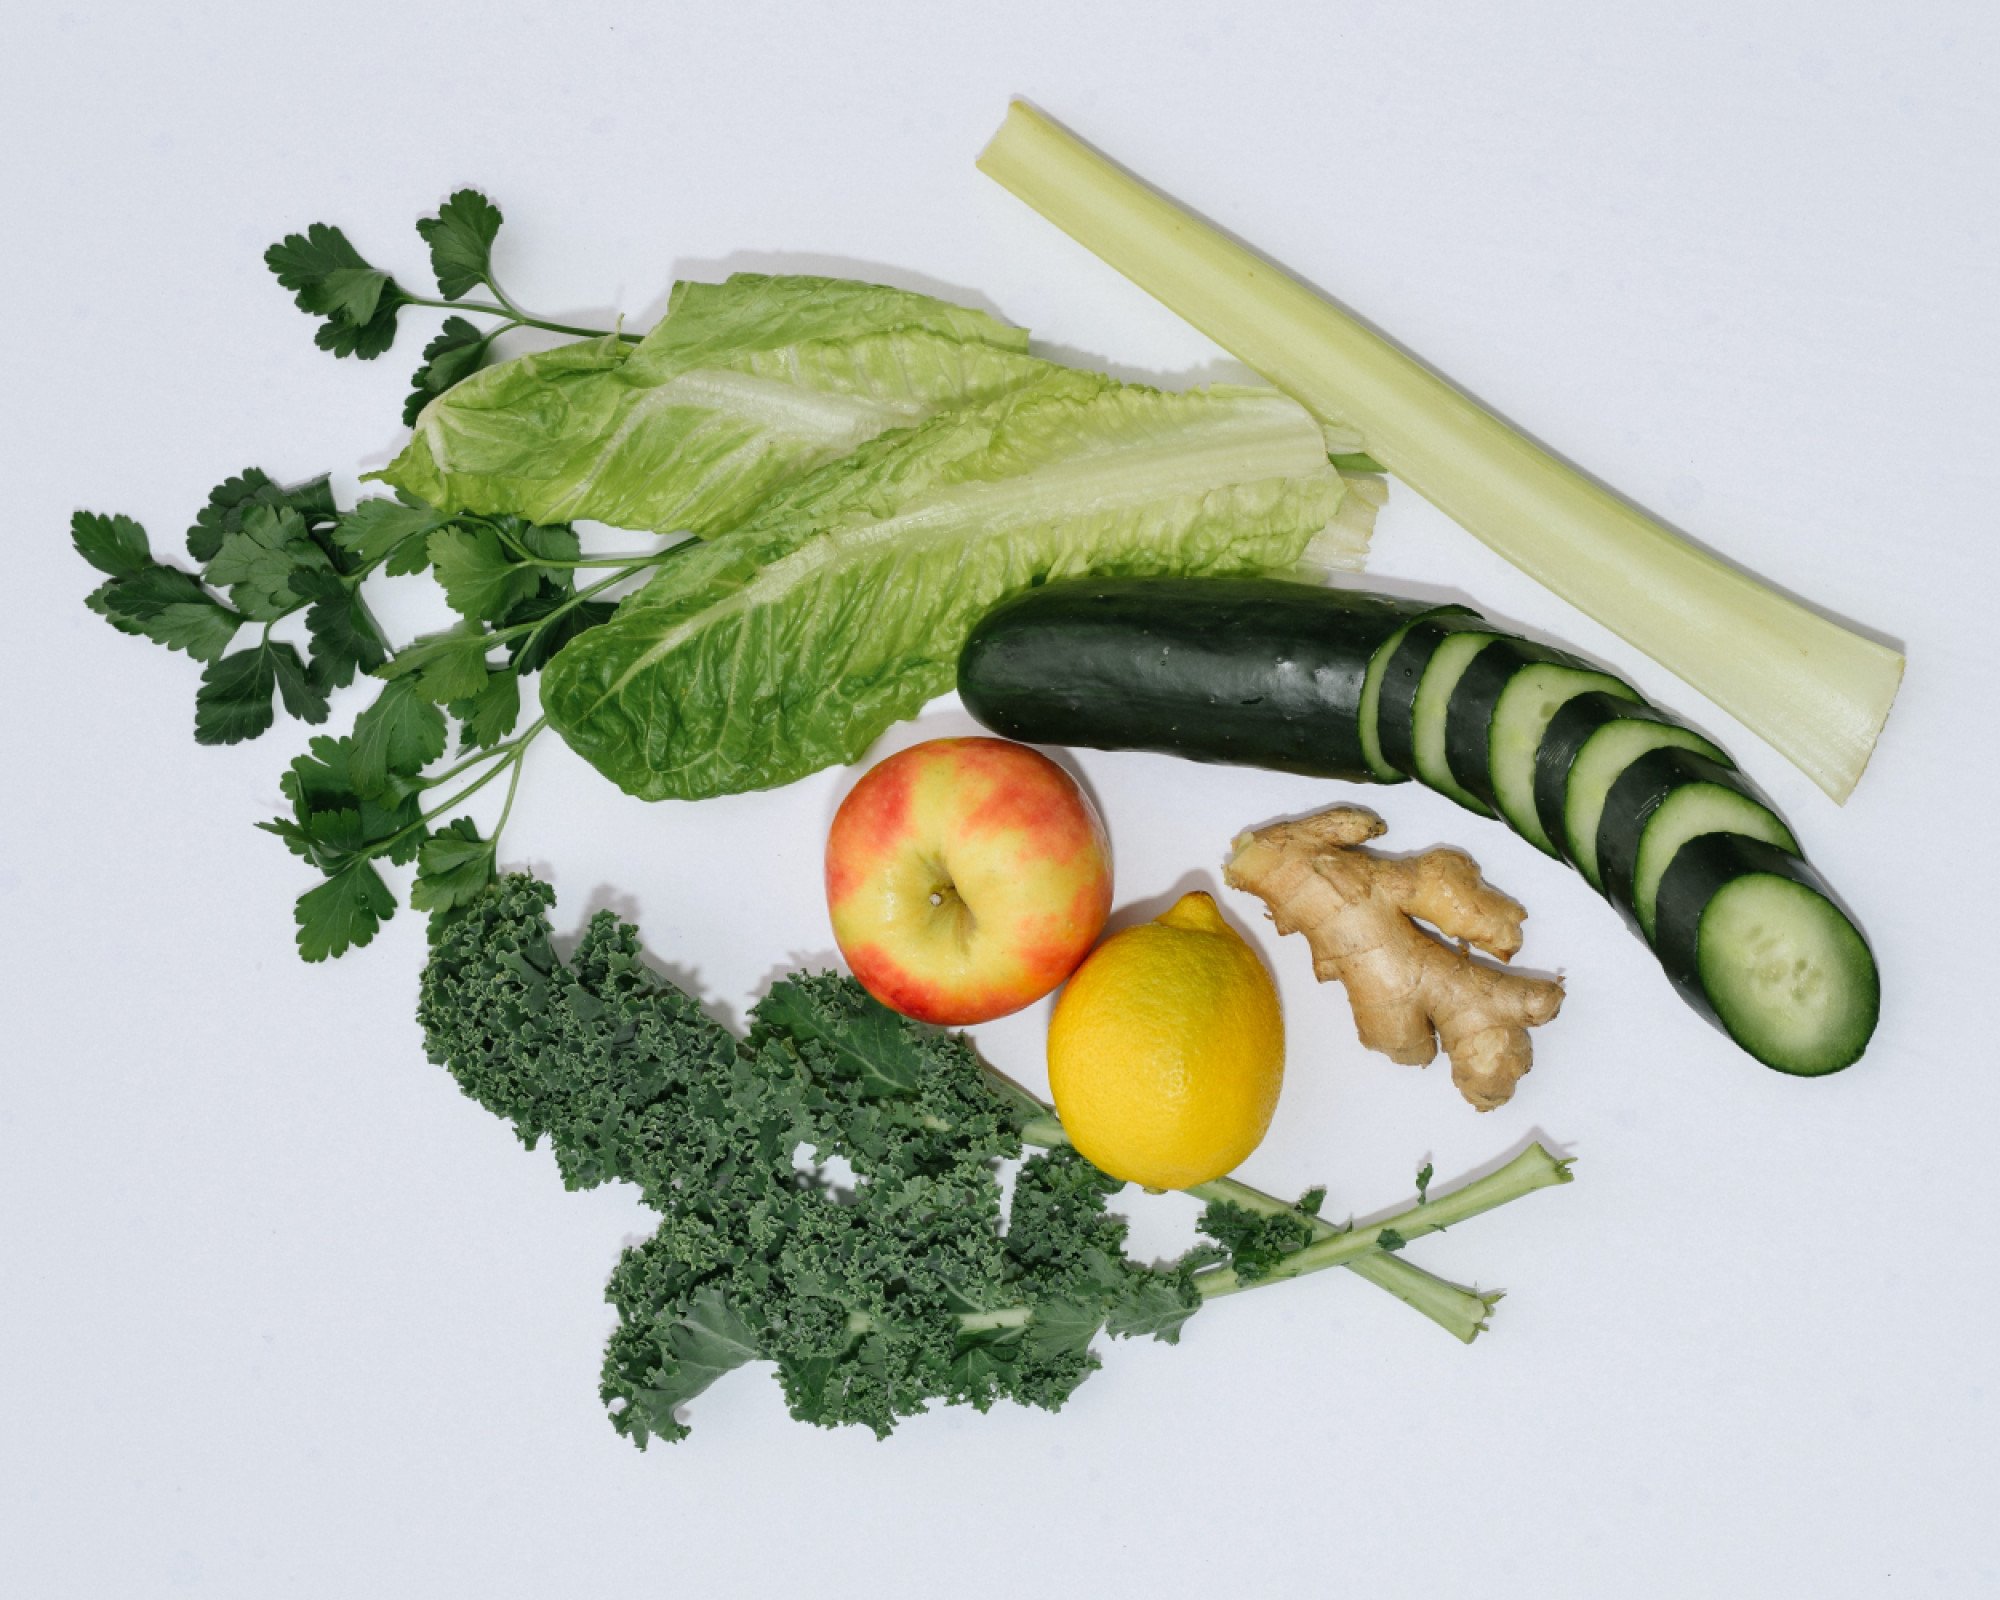 Does celery and cucumber juice detox and help with bloating?